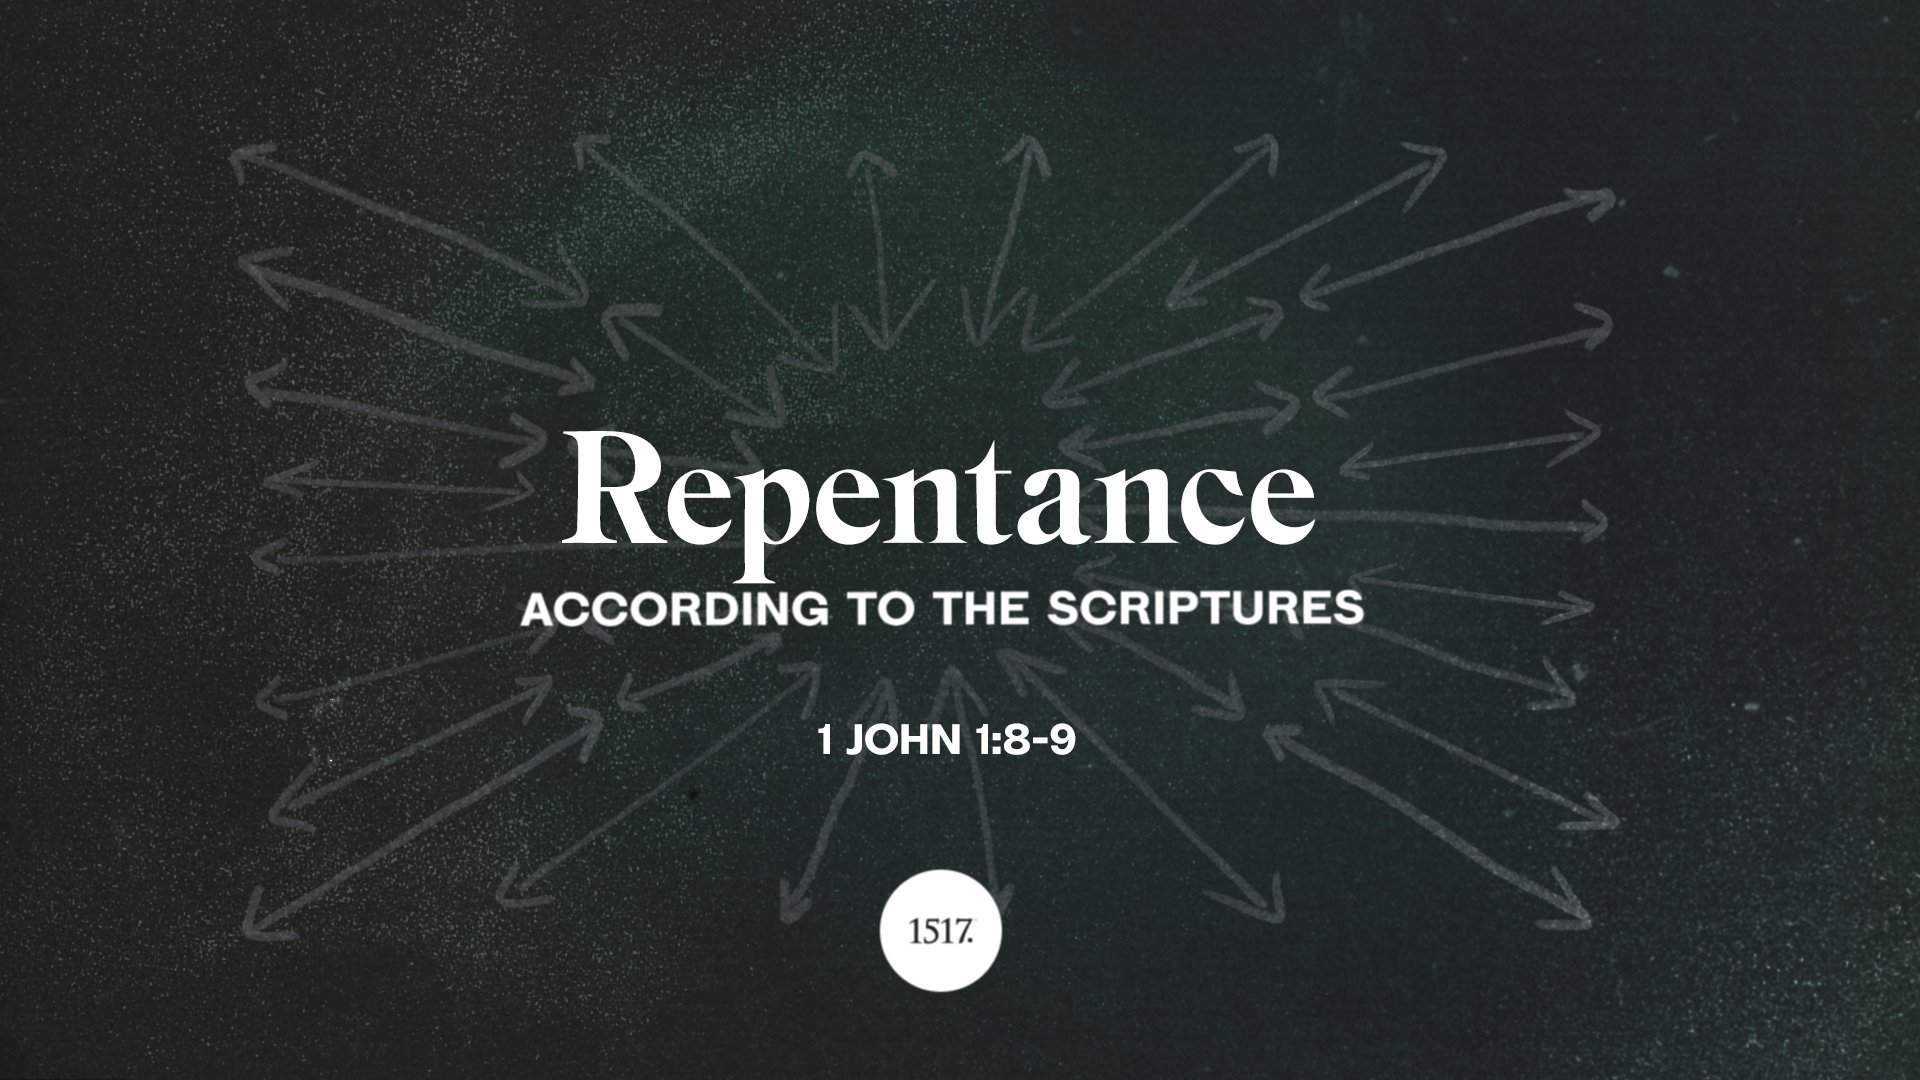 Repentance According to the Scriptures: 1 John 1:8-9